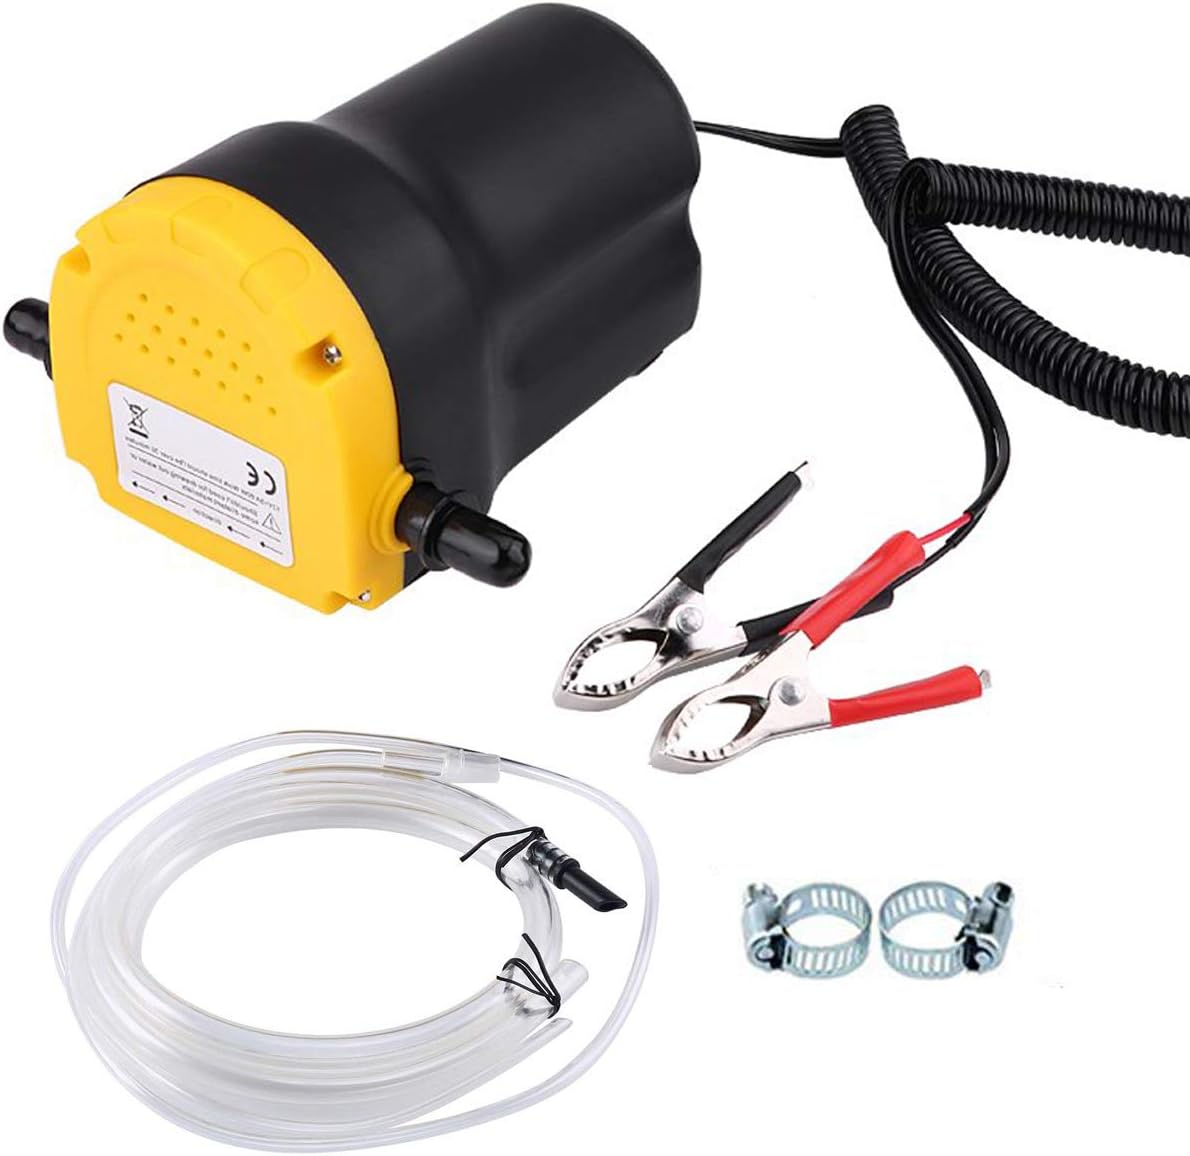 Oil Change Pump Extractor, 12v 60w Oil Extractor Pump Oil Pump Extractor martall.pk